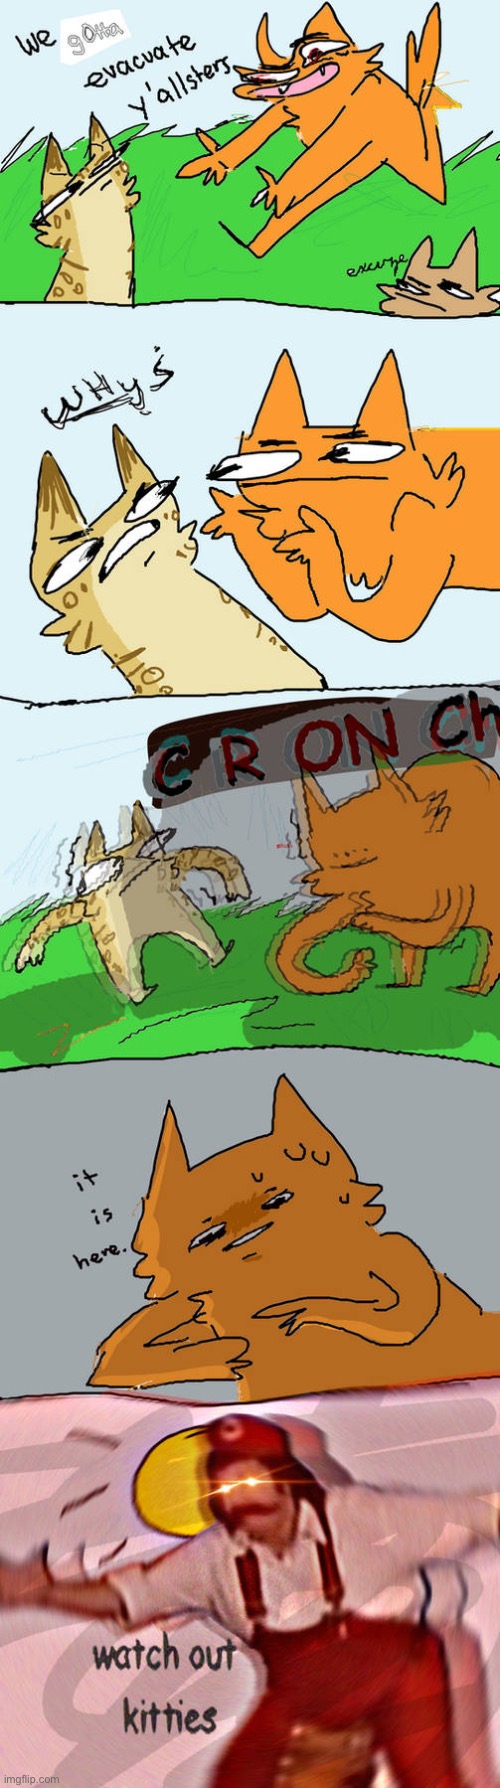 Meme comic | image tagged in warrior cats,comic | made w/ Imgflip meme maker